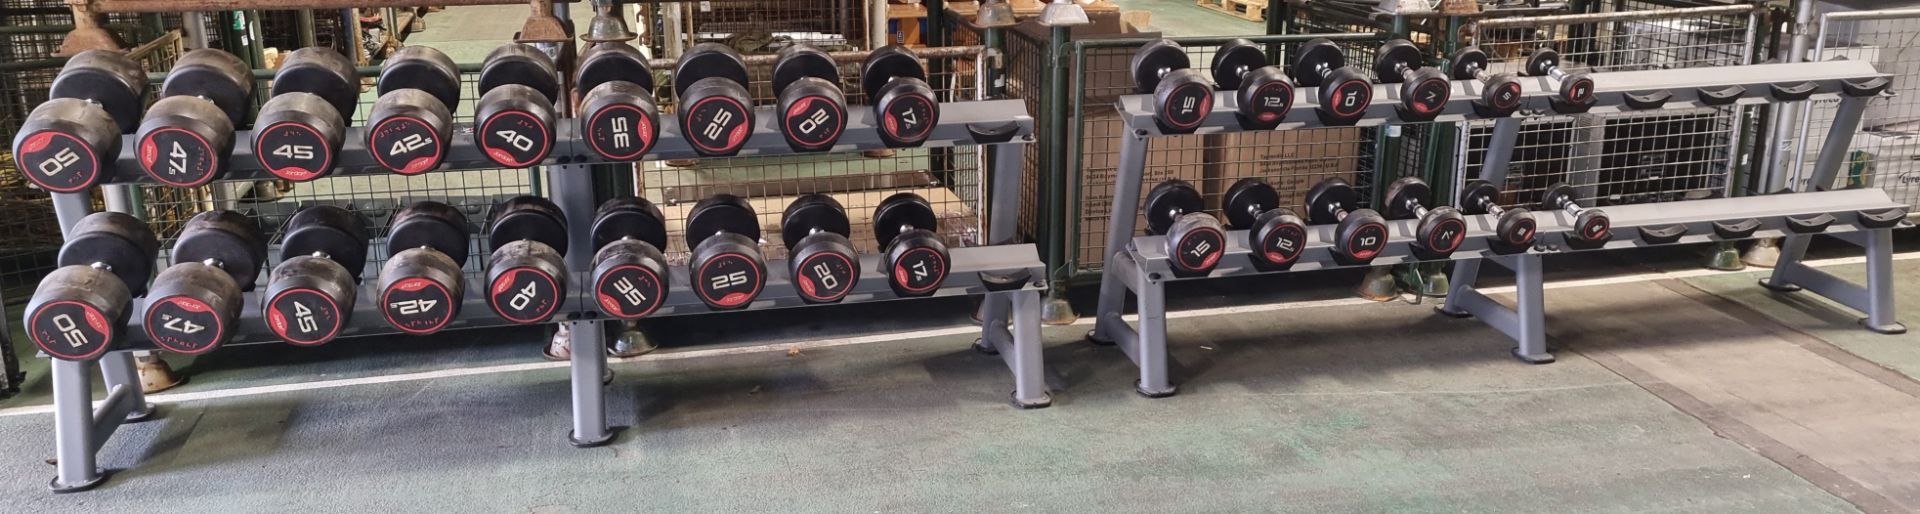 Jordan dumbell weight rack with weights 2.5kg to 50kg - see pictures